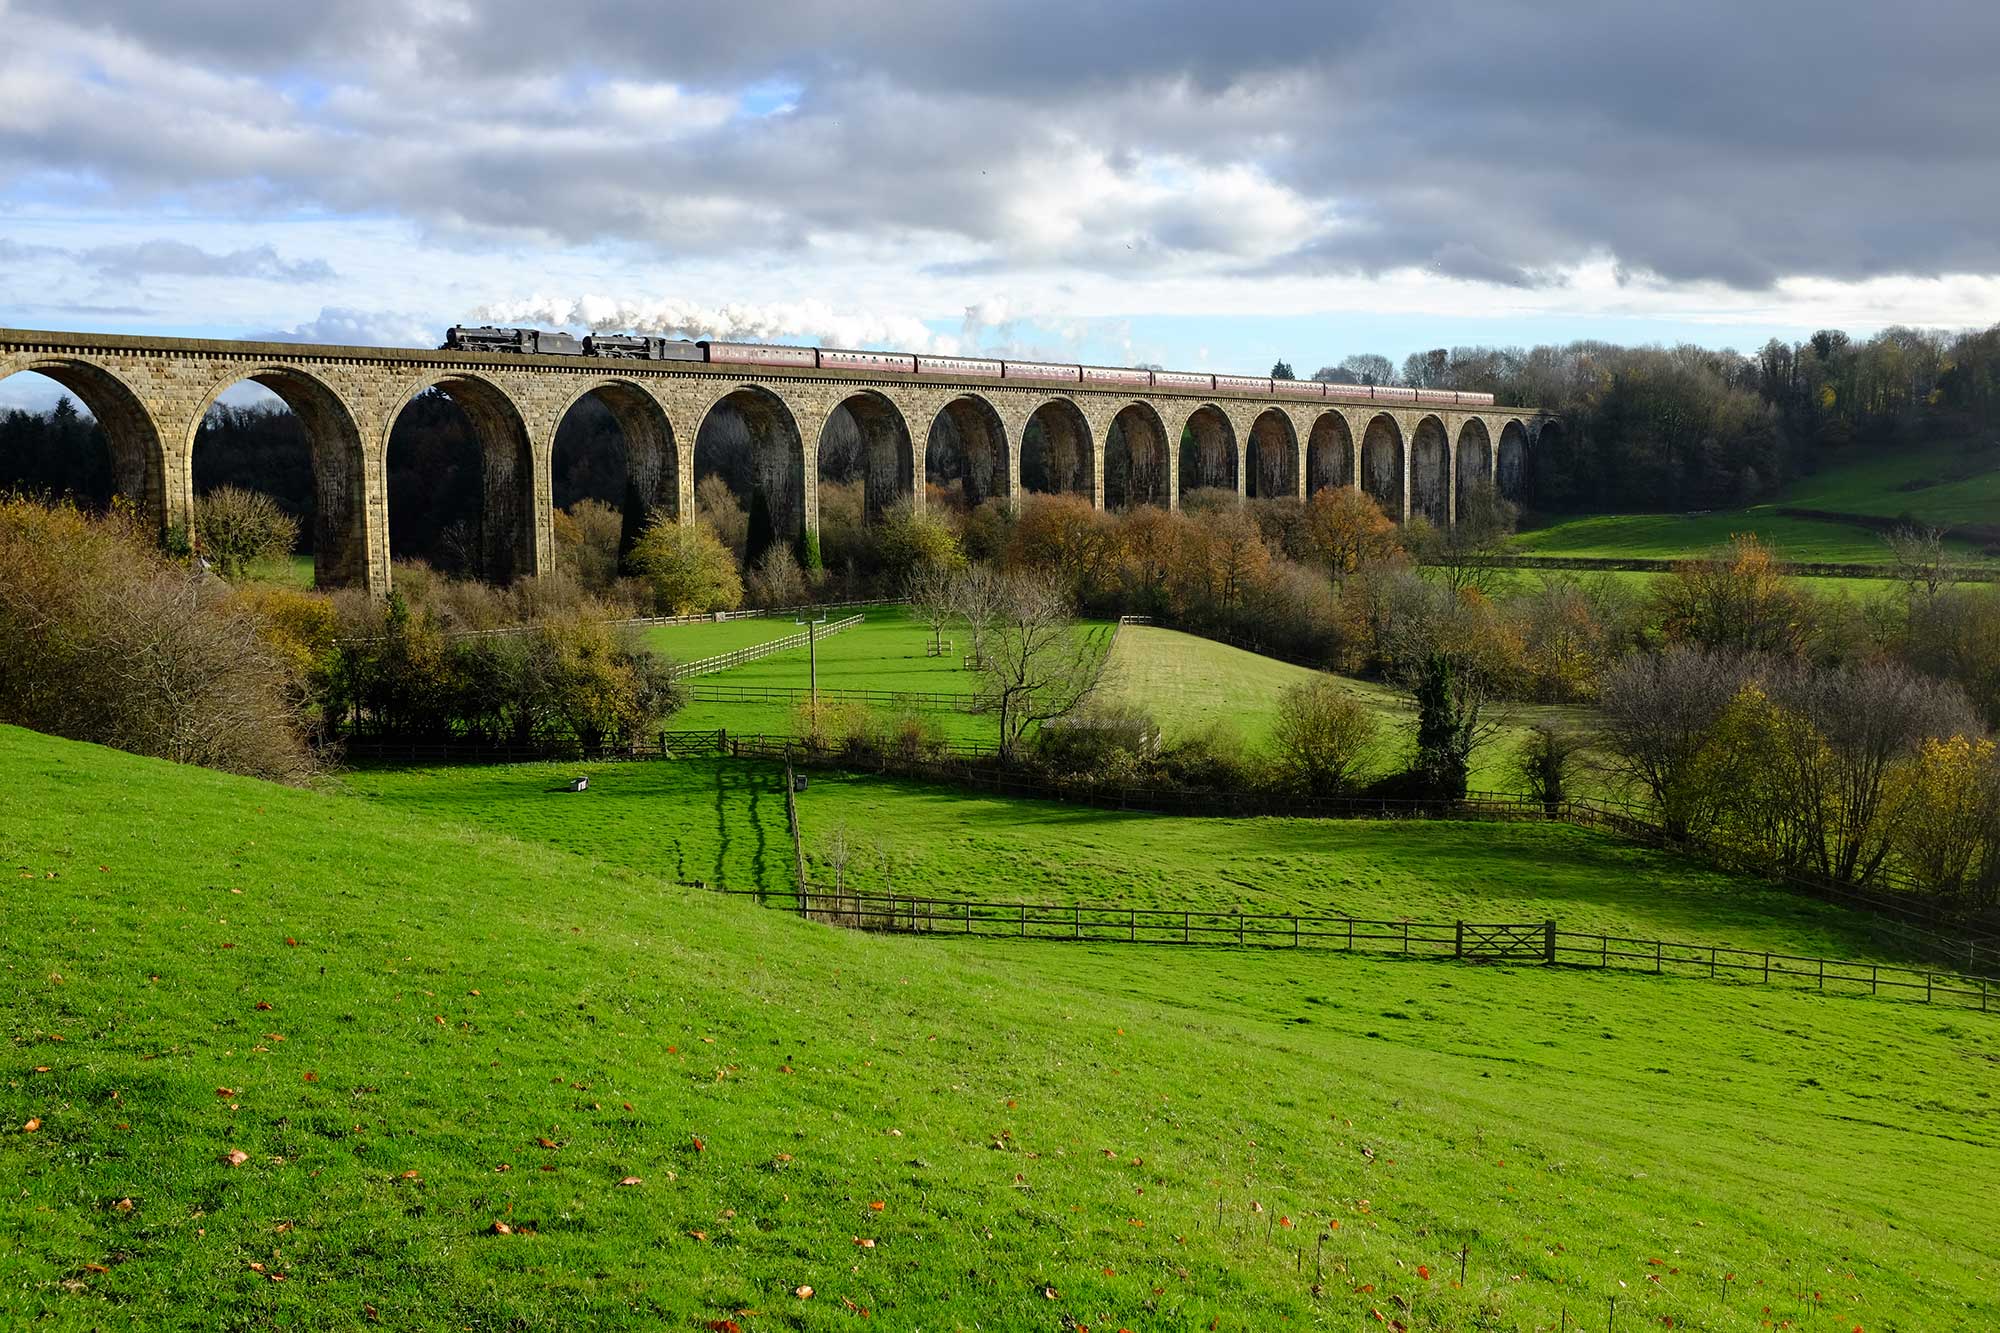 Traphont Cefn Viaduct